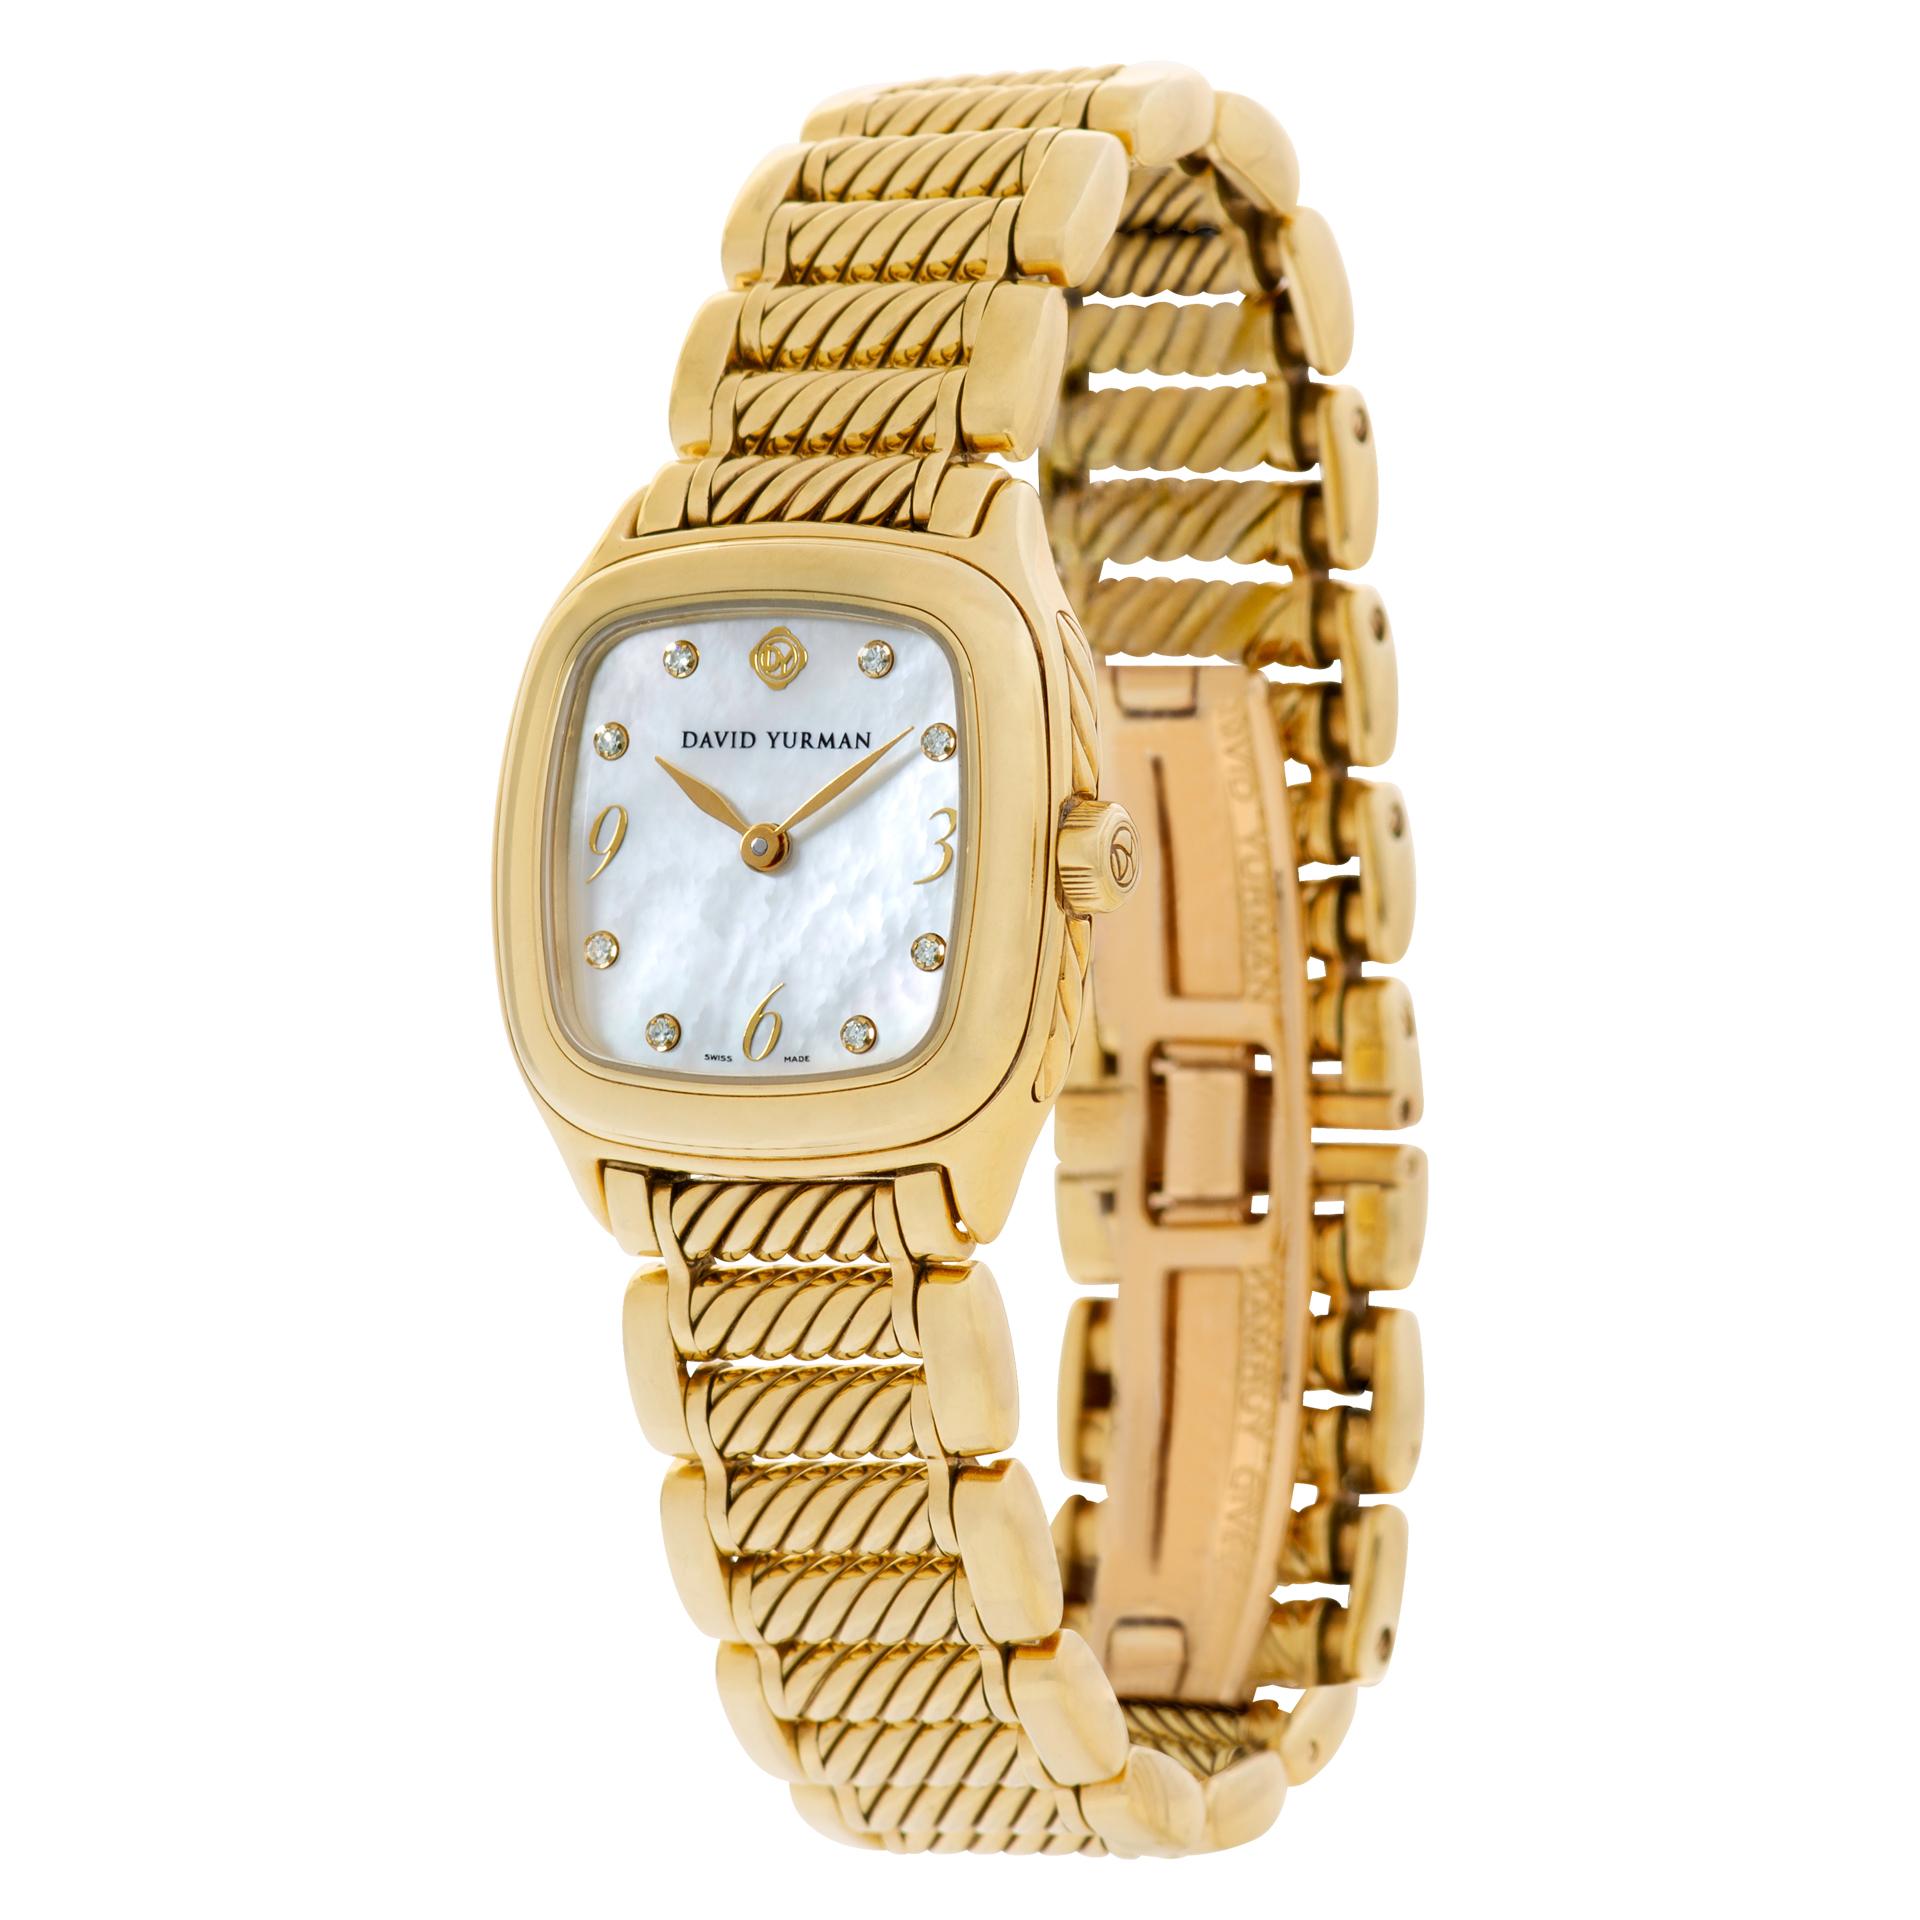 David Yurman Thoroughbred with Mother of Pearl diamond dial in 18k yellow gold. Quartz. 25 mm case size. Ref T304-XS88. Fits up to 7'' wrist. Circa 2015. Fine Pre-owned David Yurman Watch. Certified preowned Classic David Yurman Thoroughbred